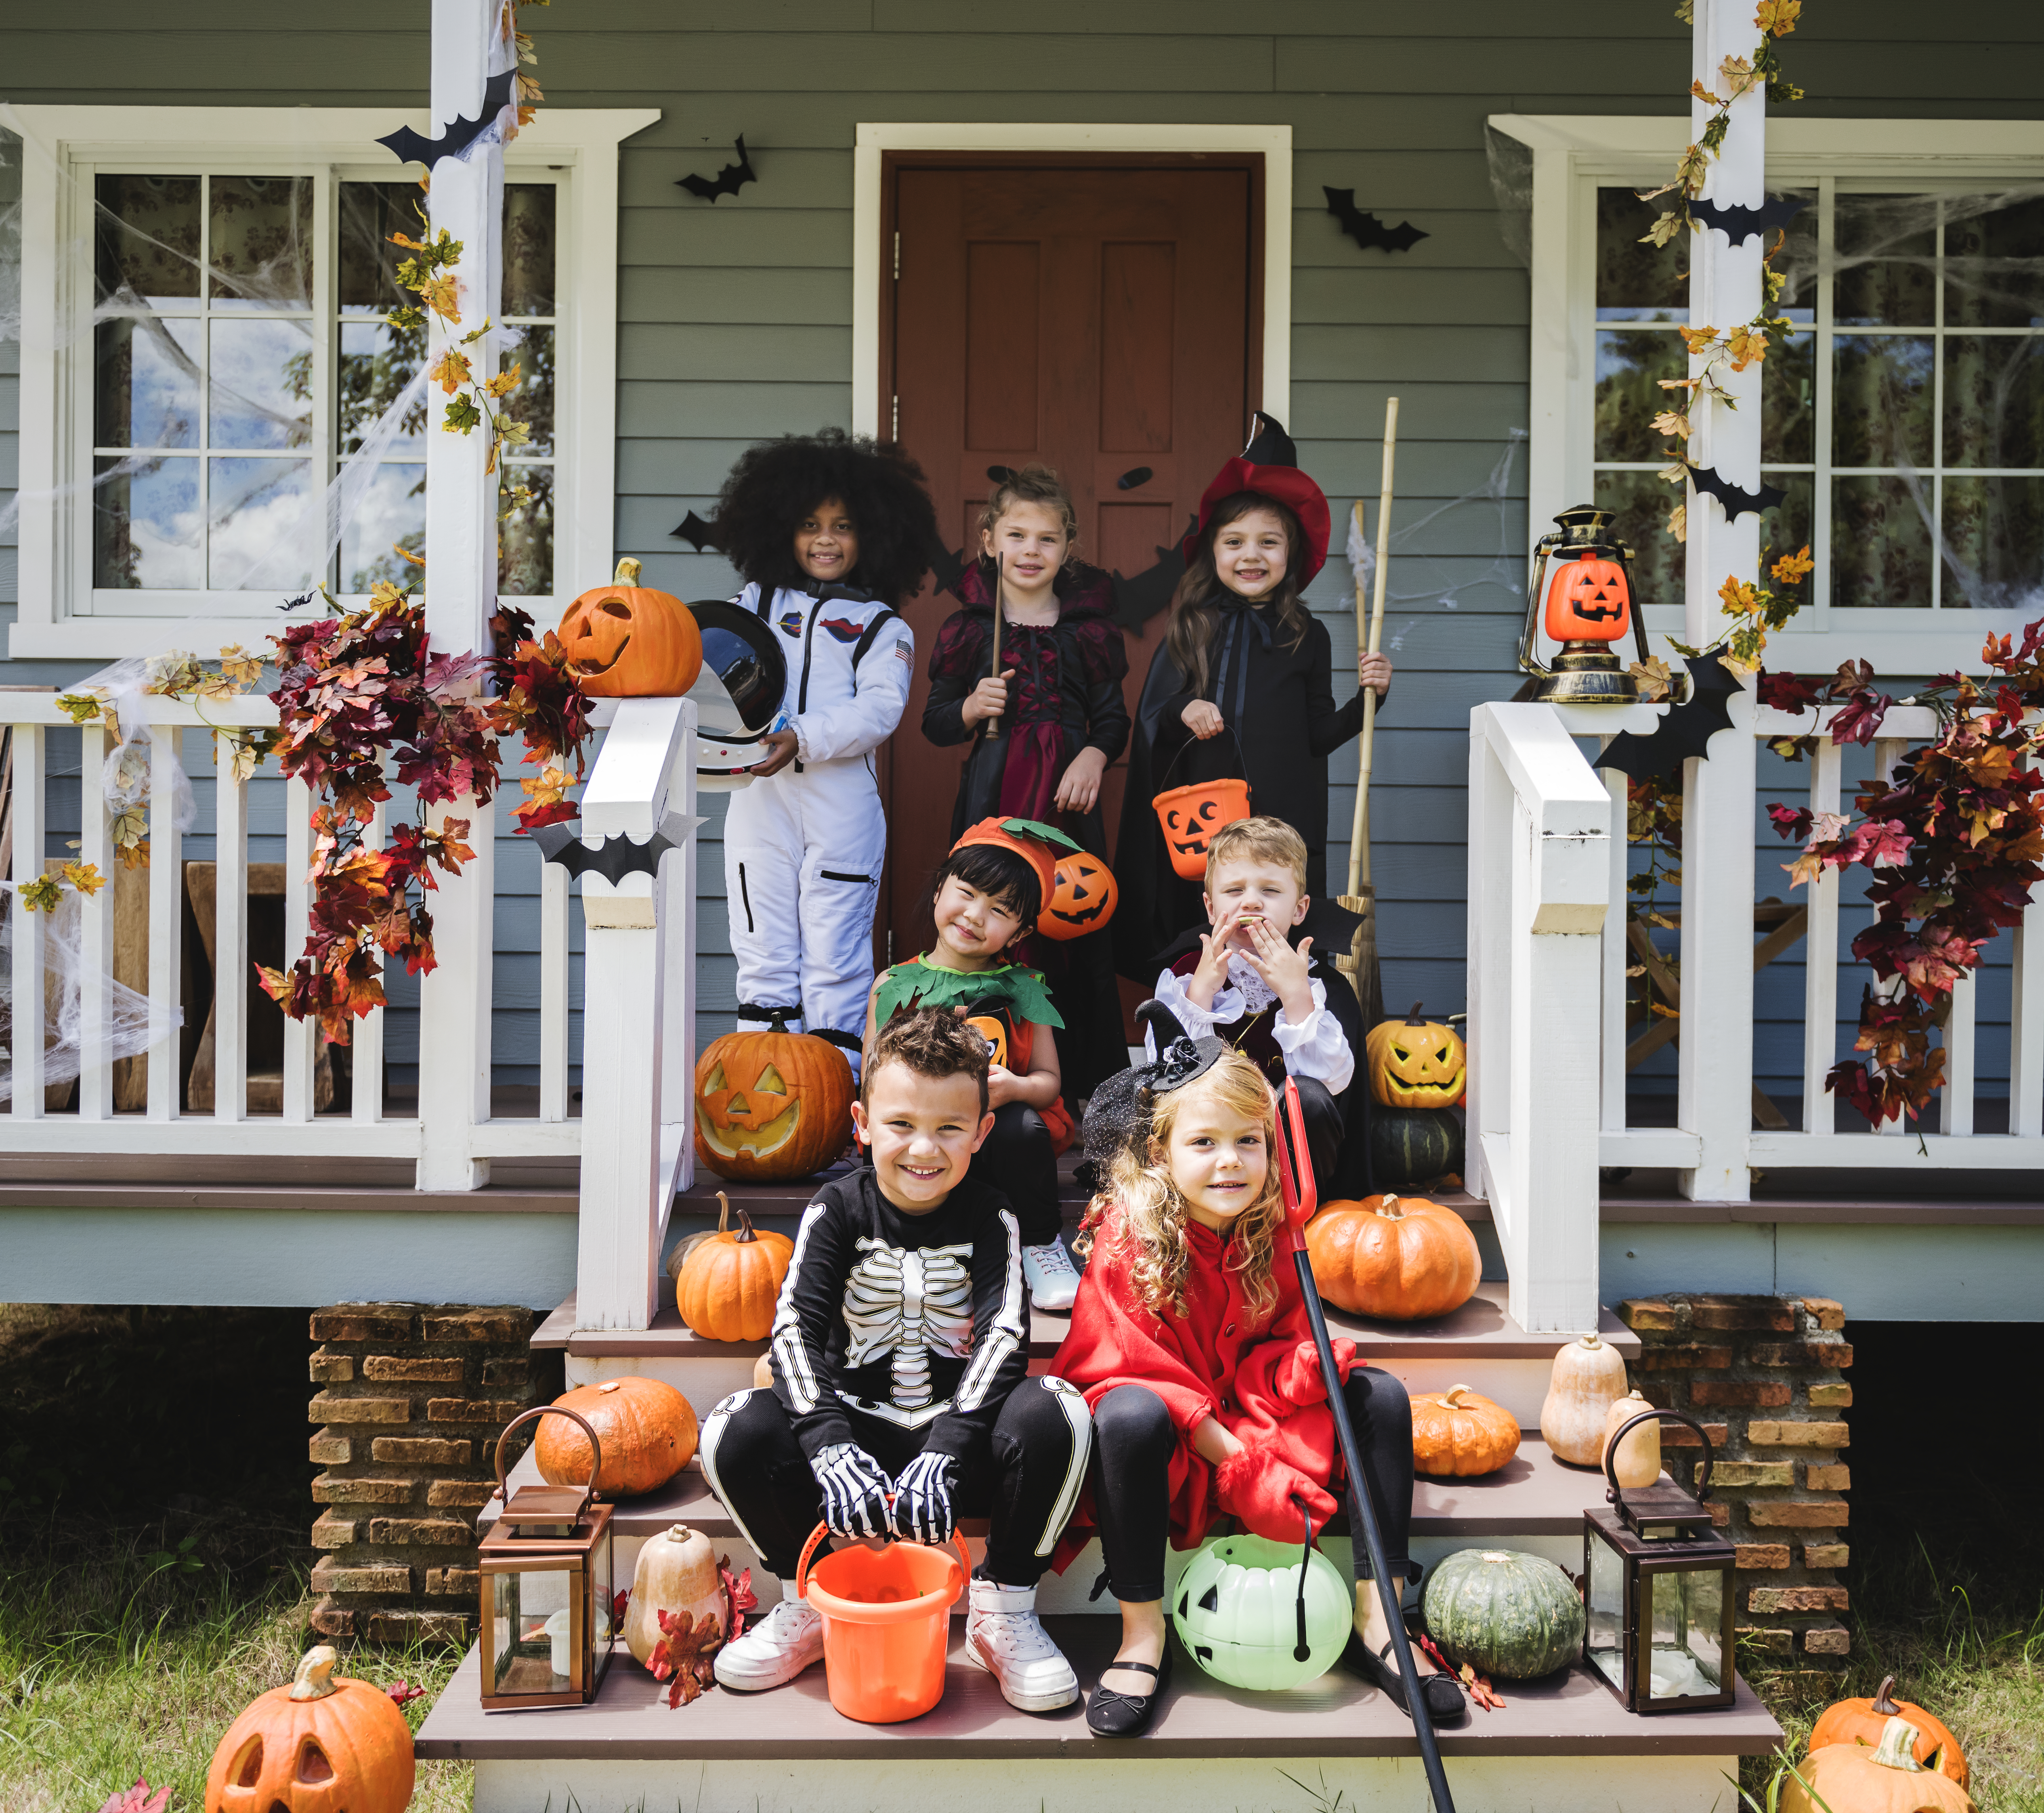 Children in Halloween costumes trick or treating.